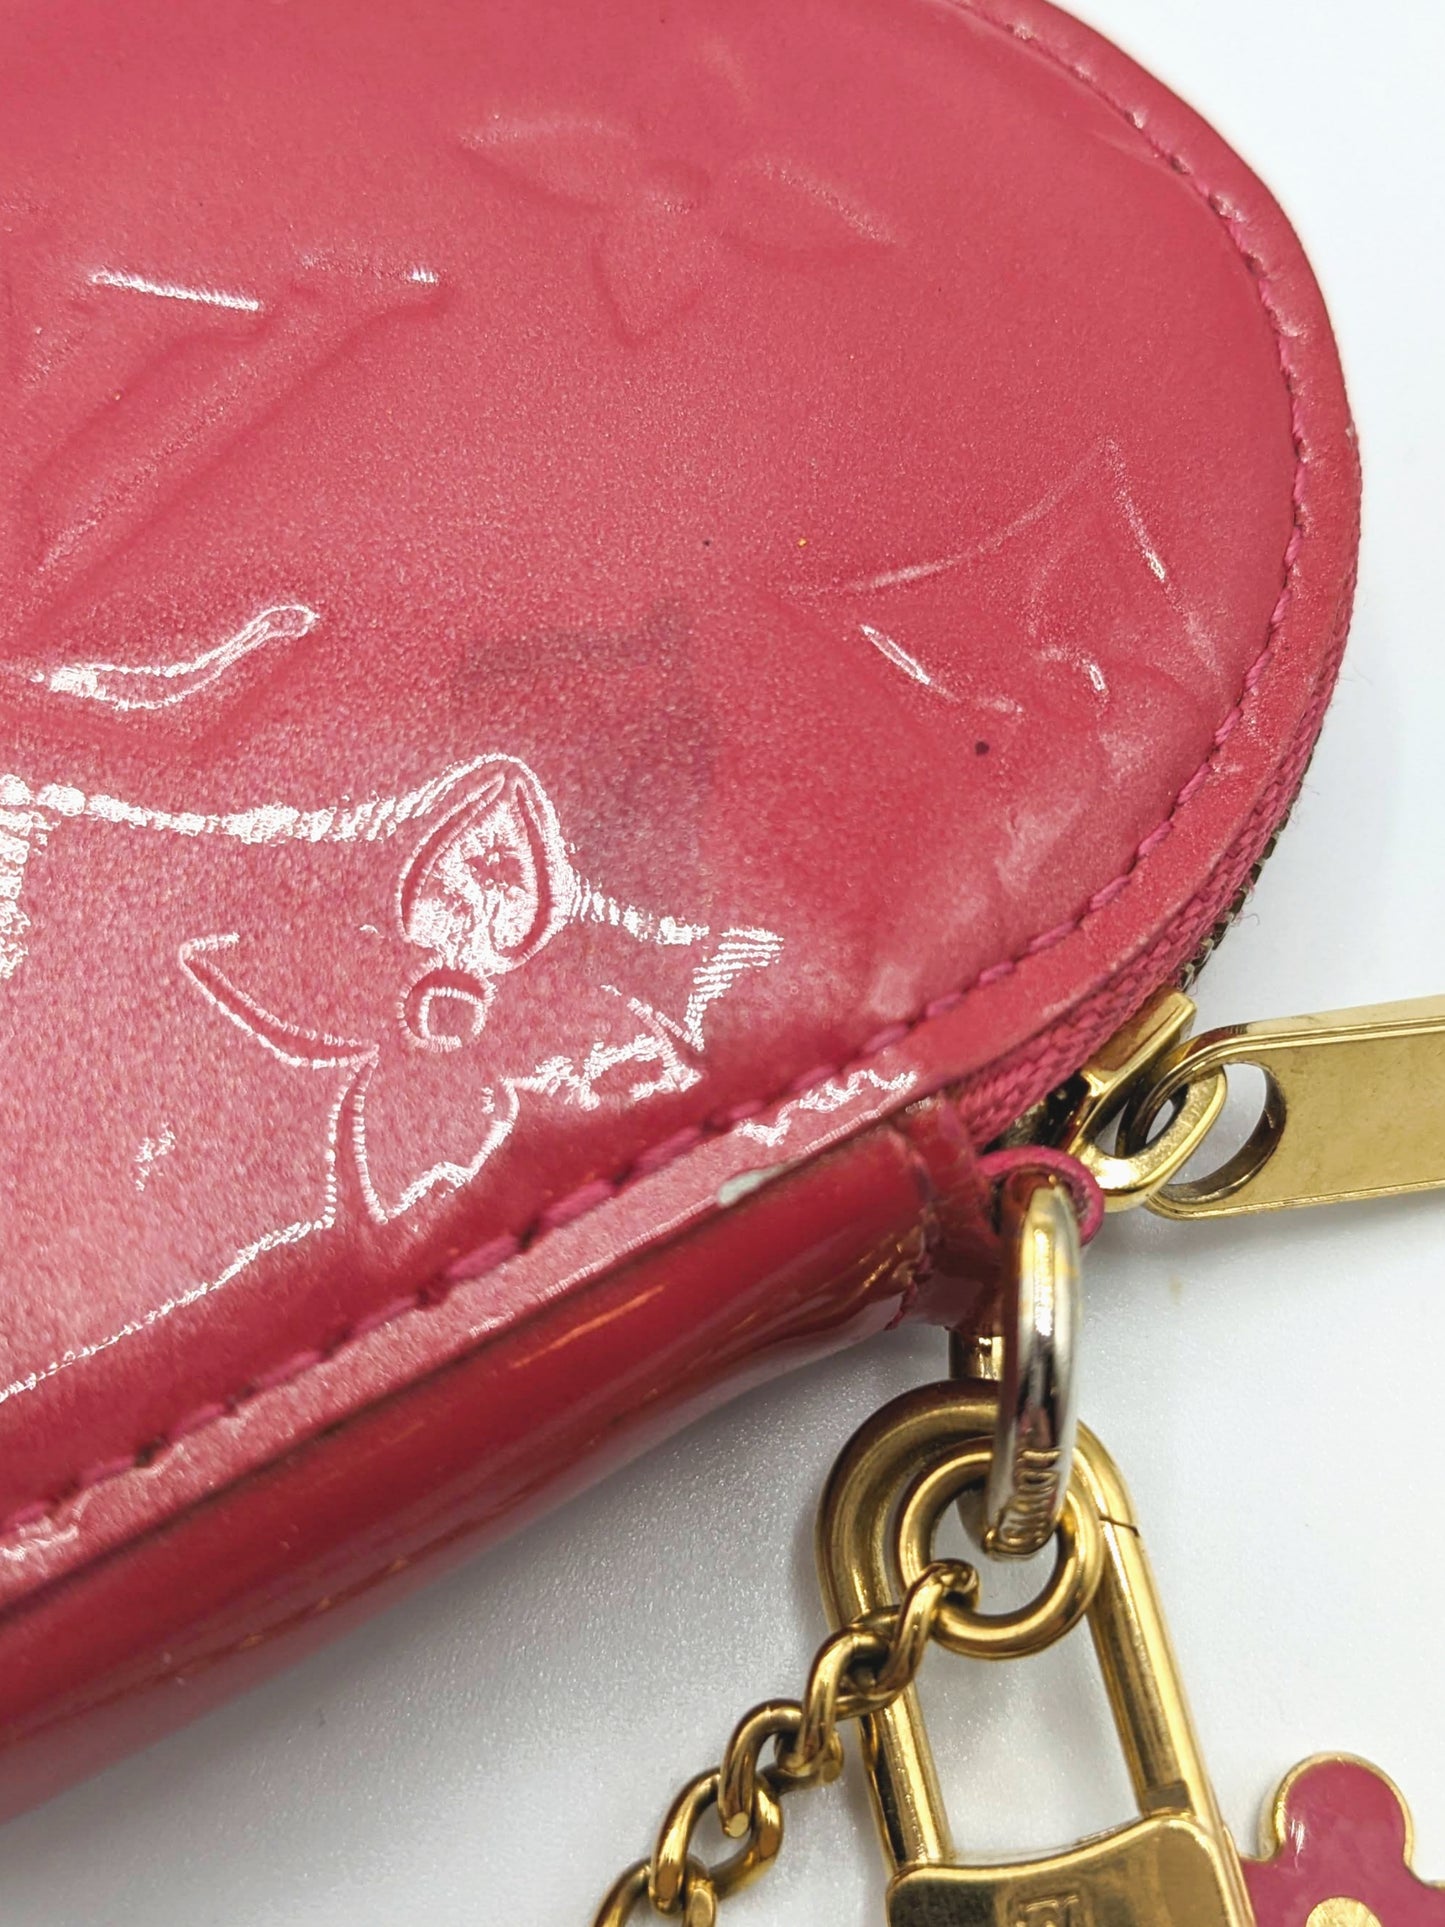  Louis Vuitton M69028 Coin Case, Women's, Pouch, Heart, Red,  Pink, Gradient, Monogram Verni, Patent Calf Leather, Portmonet Cool, pink :  Clothing, Shoes & Jewelry